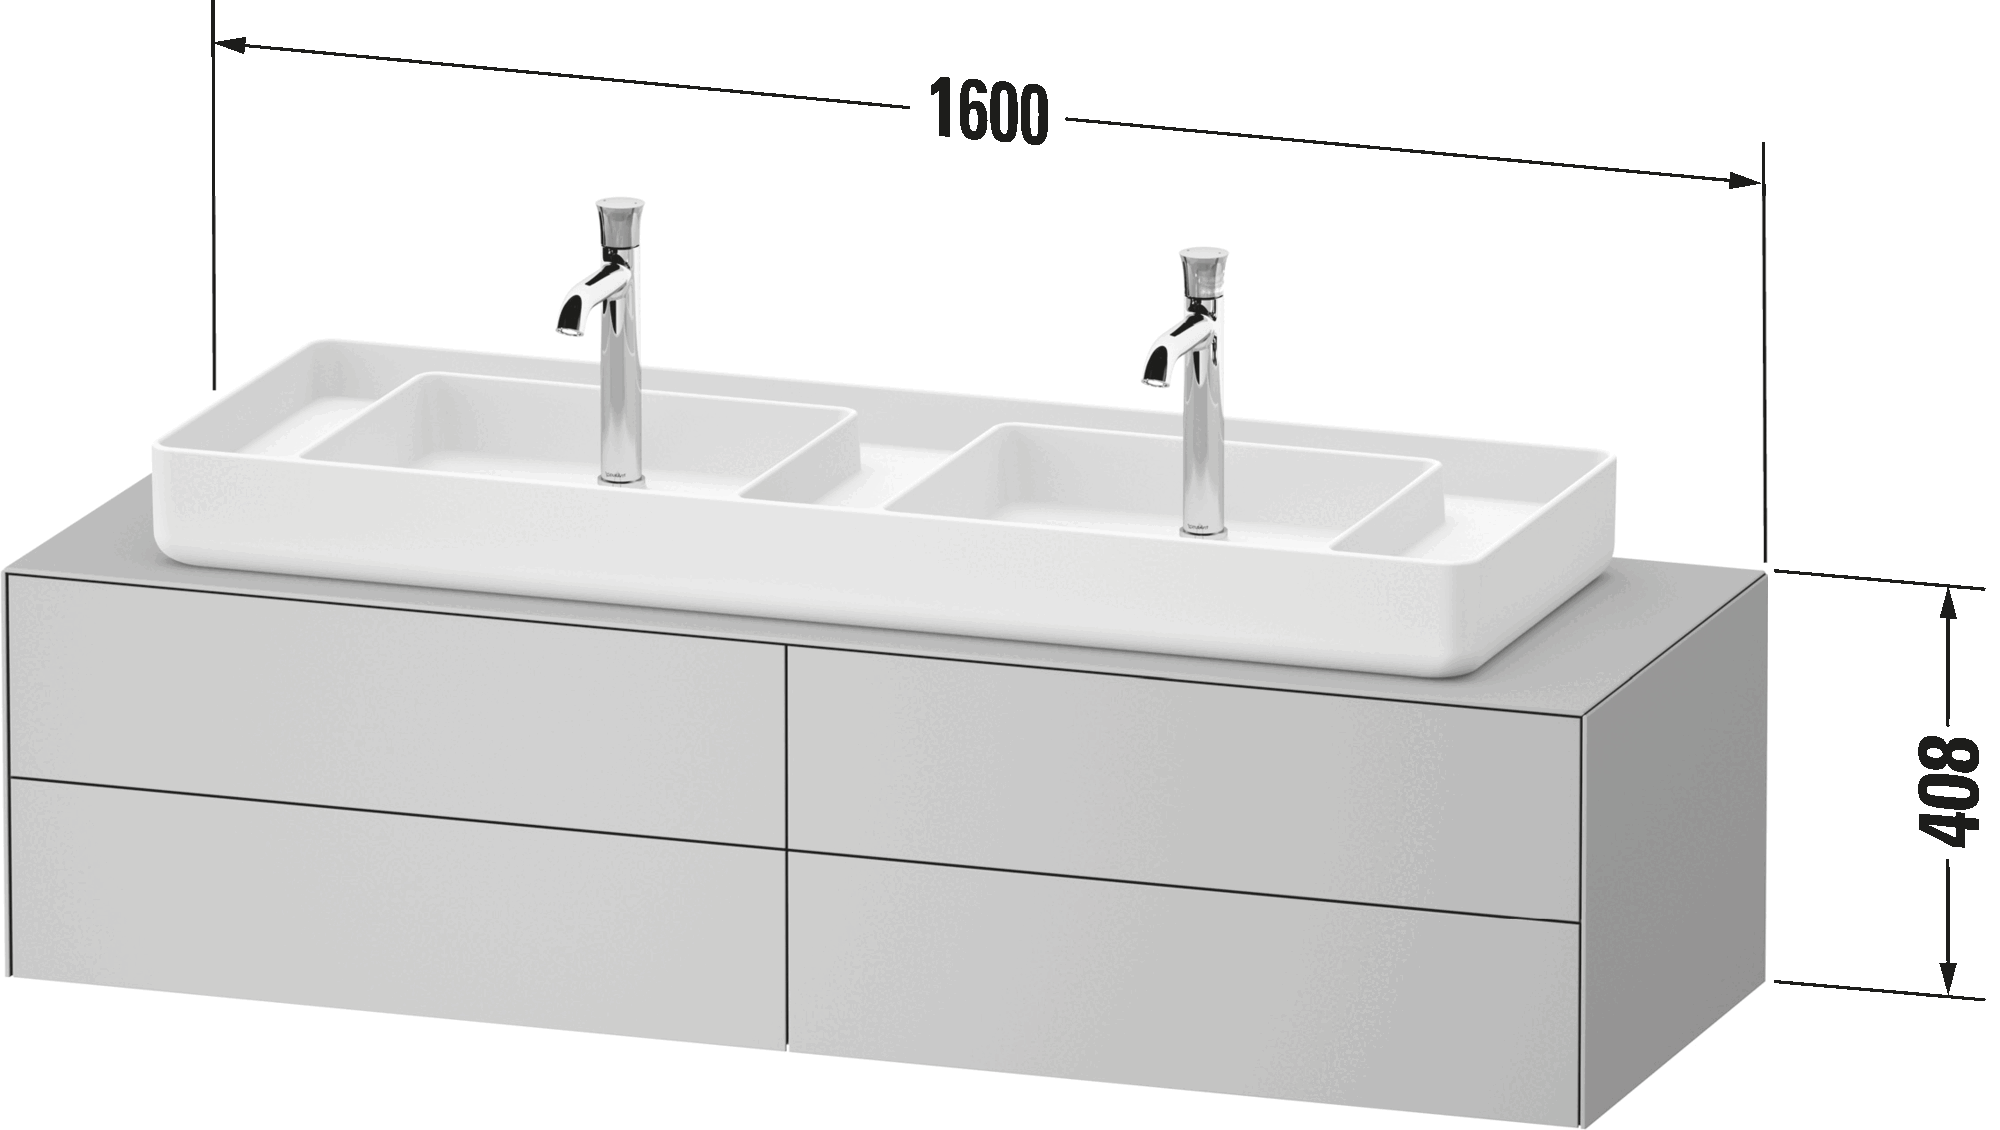 Console vanity unit wall-mounted, WT4869